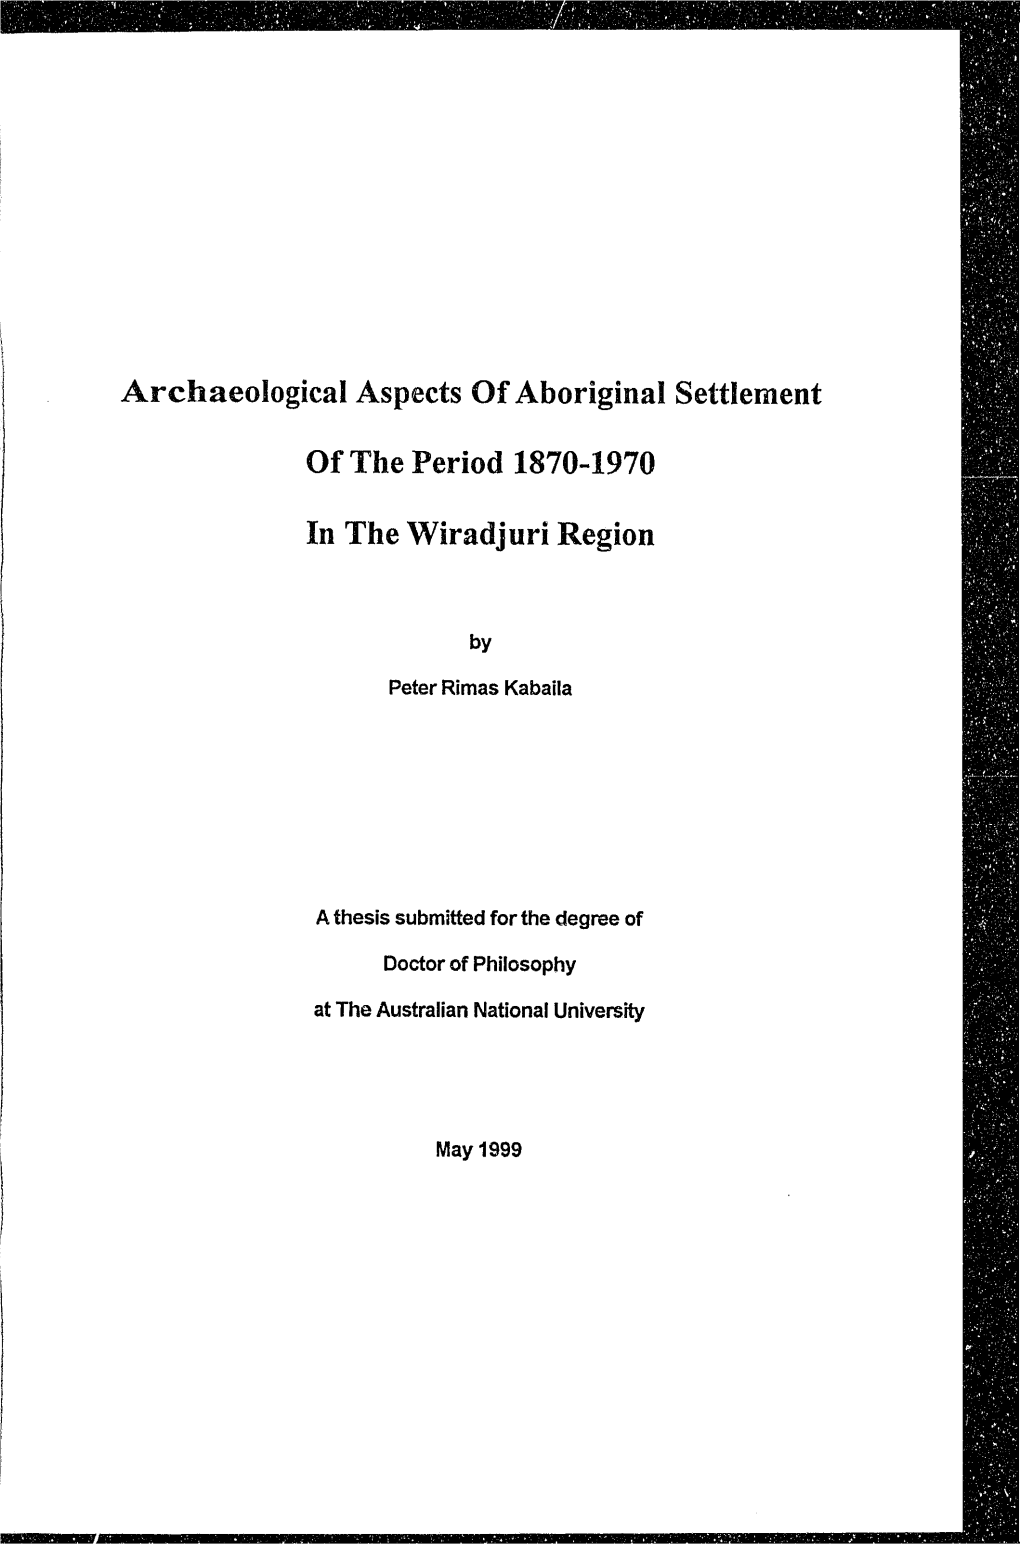 Archaeological Aspects of Aboriginal Settlement of the Period 1870